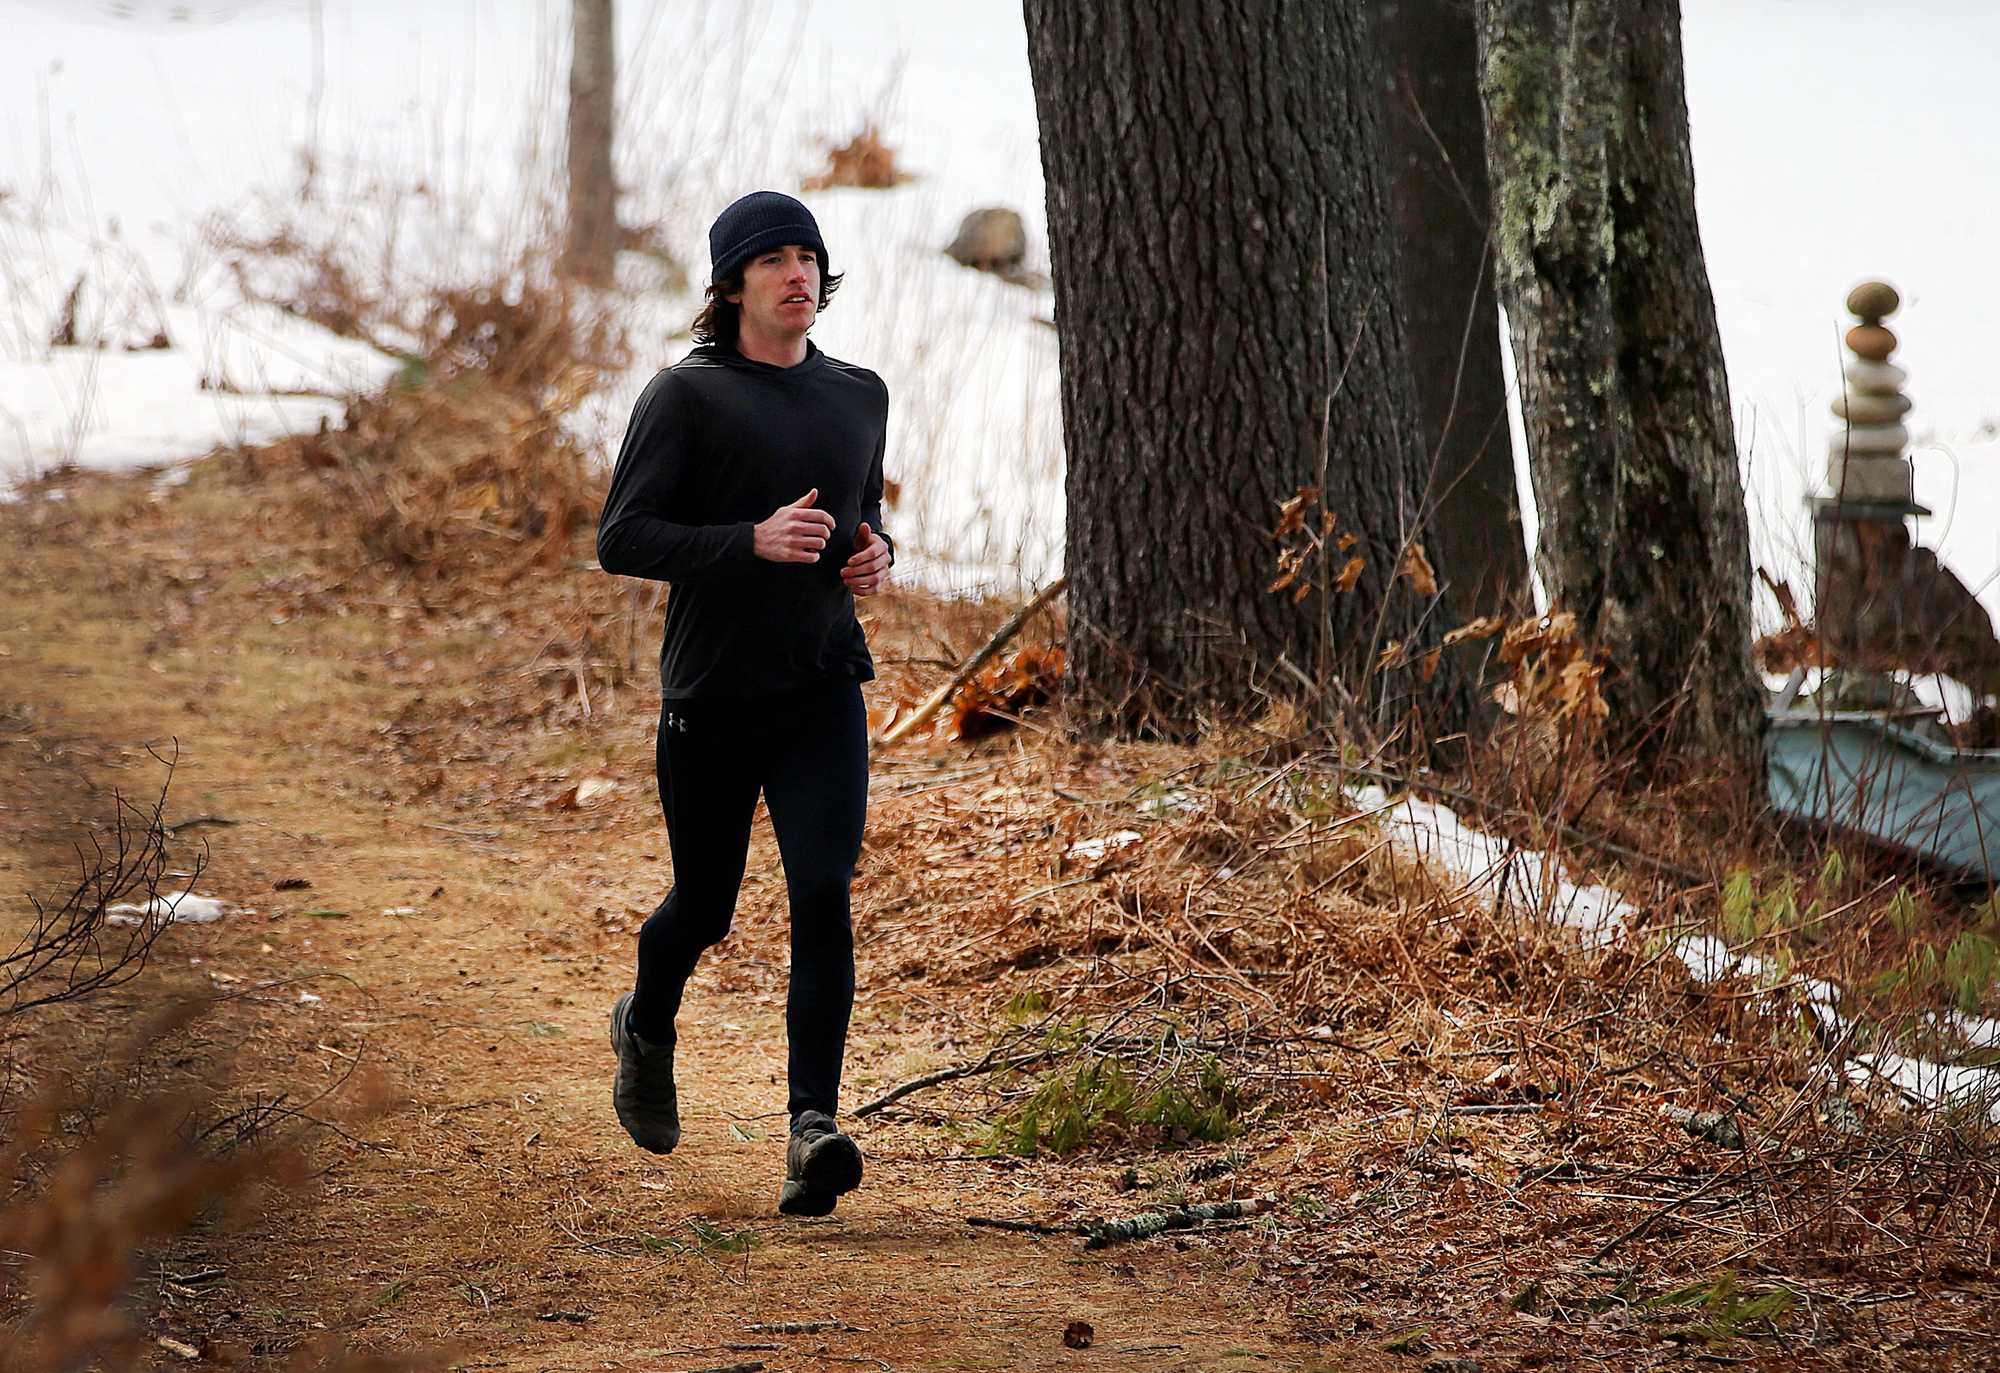 Bobby O’Donnell ran along a trail near his Hopkinton home. He was a 19-year-old runner in the 2013 Boston Marathon and was on Mass. Ave. when he heard the bombs go off.